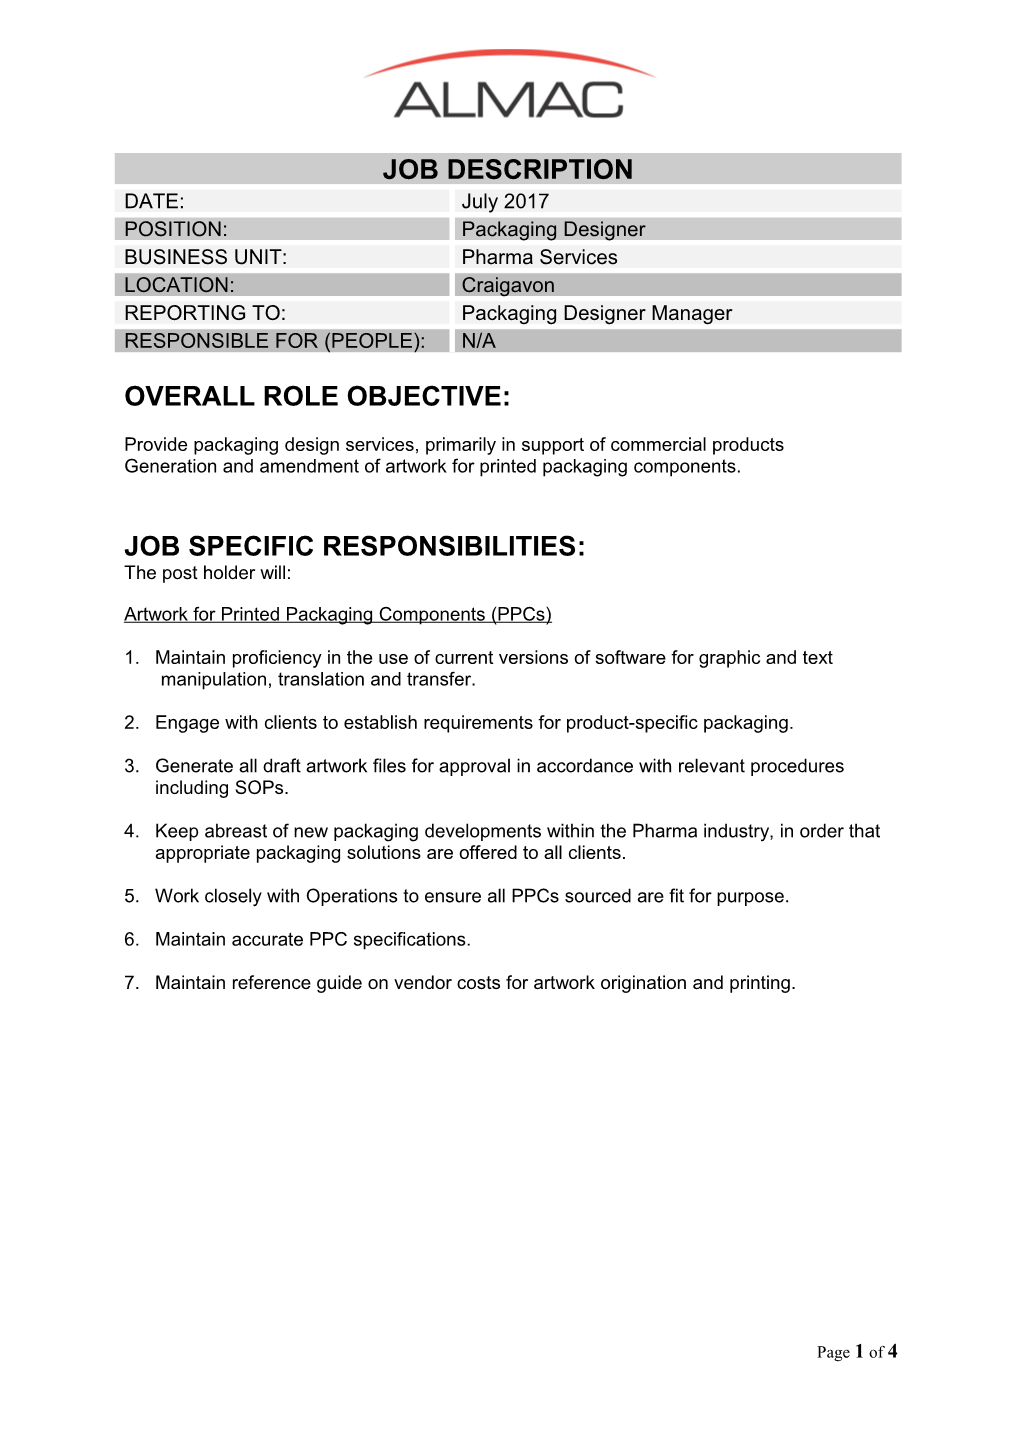 Overall Role Objective s3